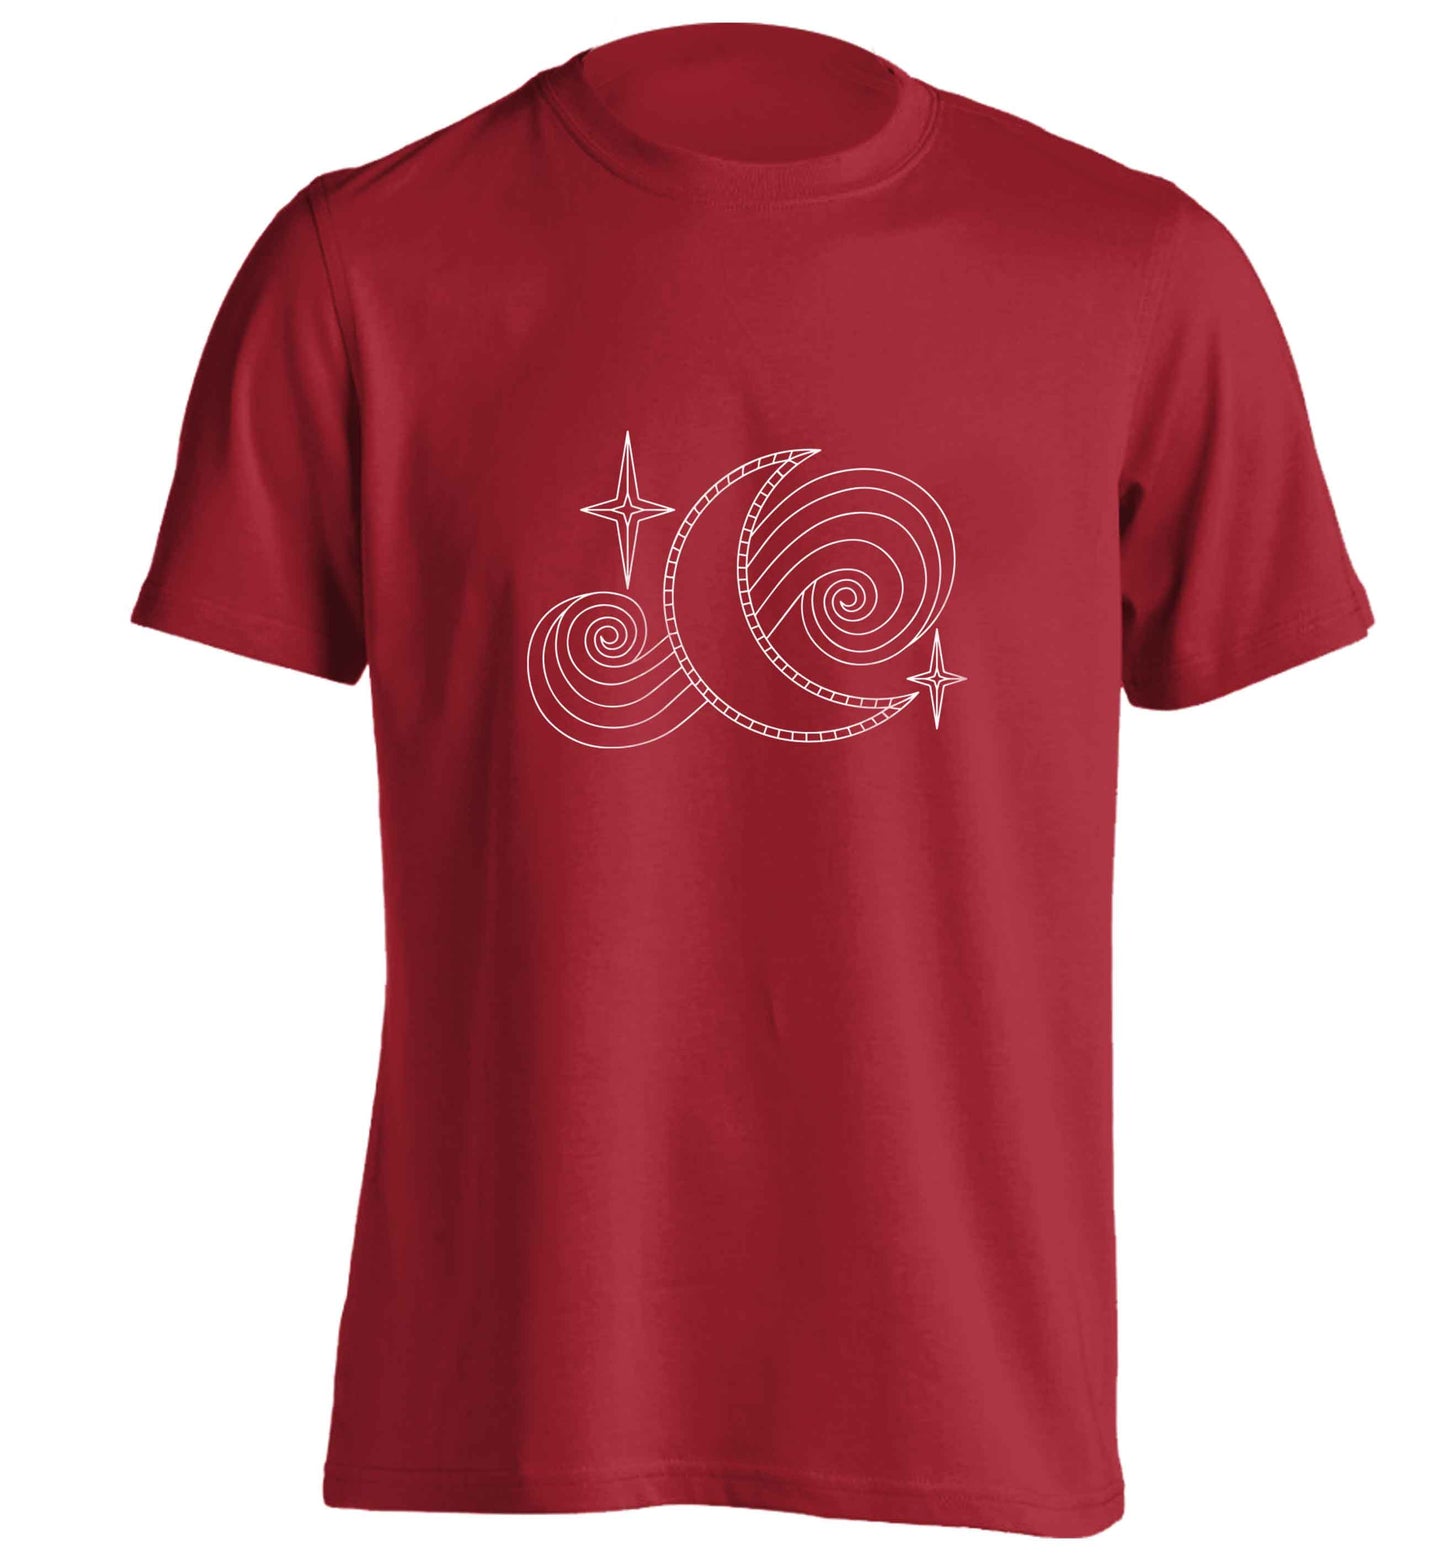 Moon and stars illustration adults unisex red Tshirt 2XL